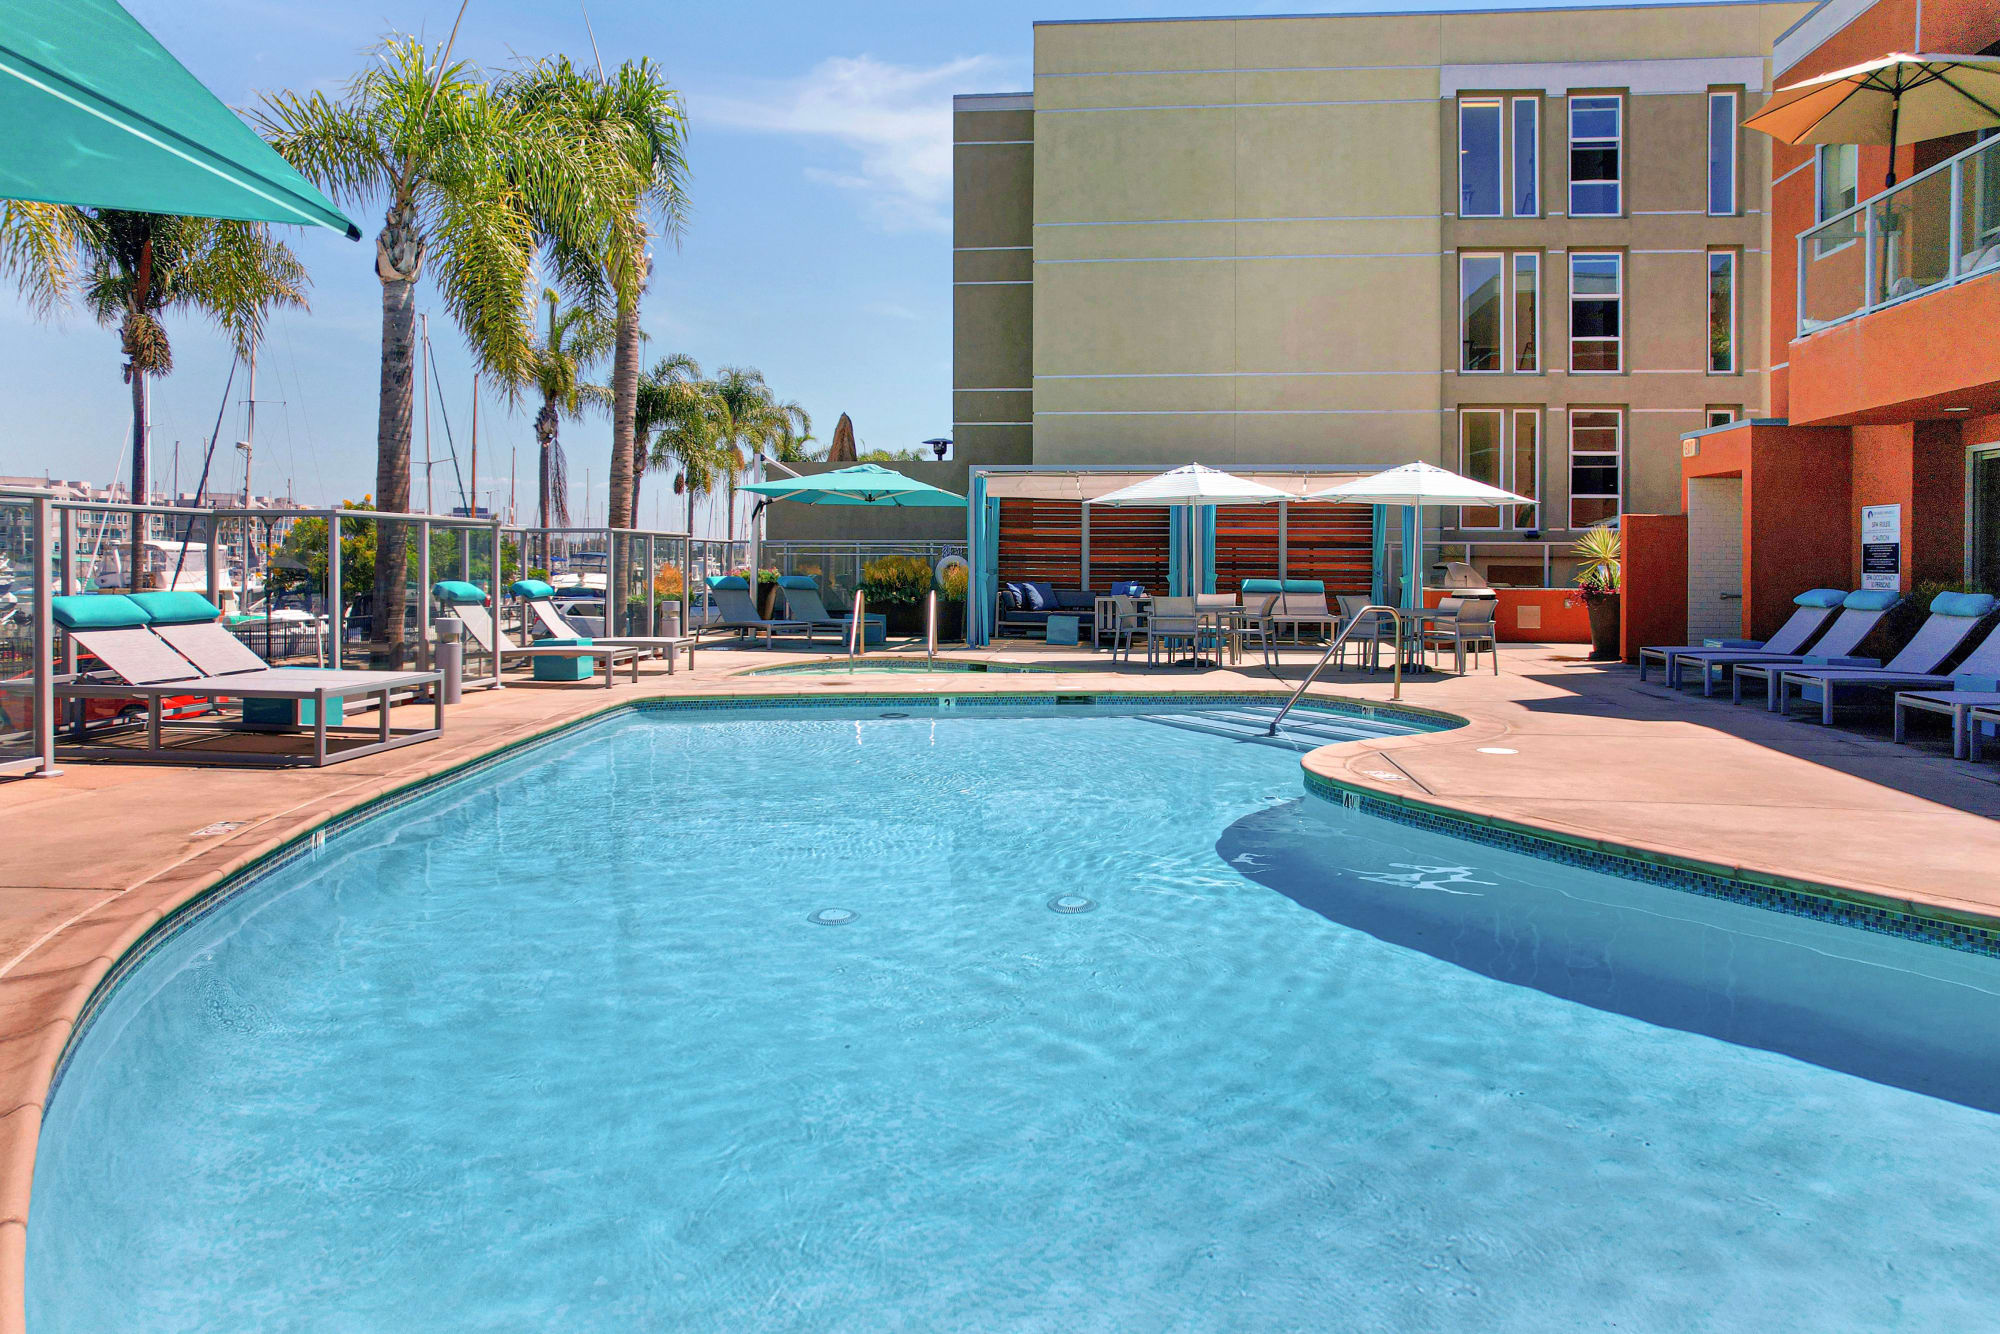 The pool and palm trees on a beautiful day at Harborside Marina Bay Apartments in Marina del Rey, California